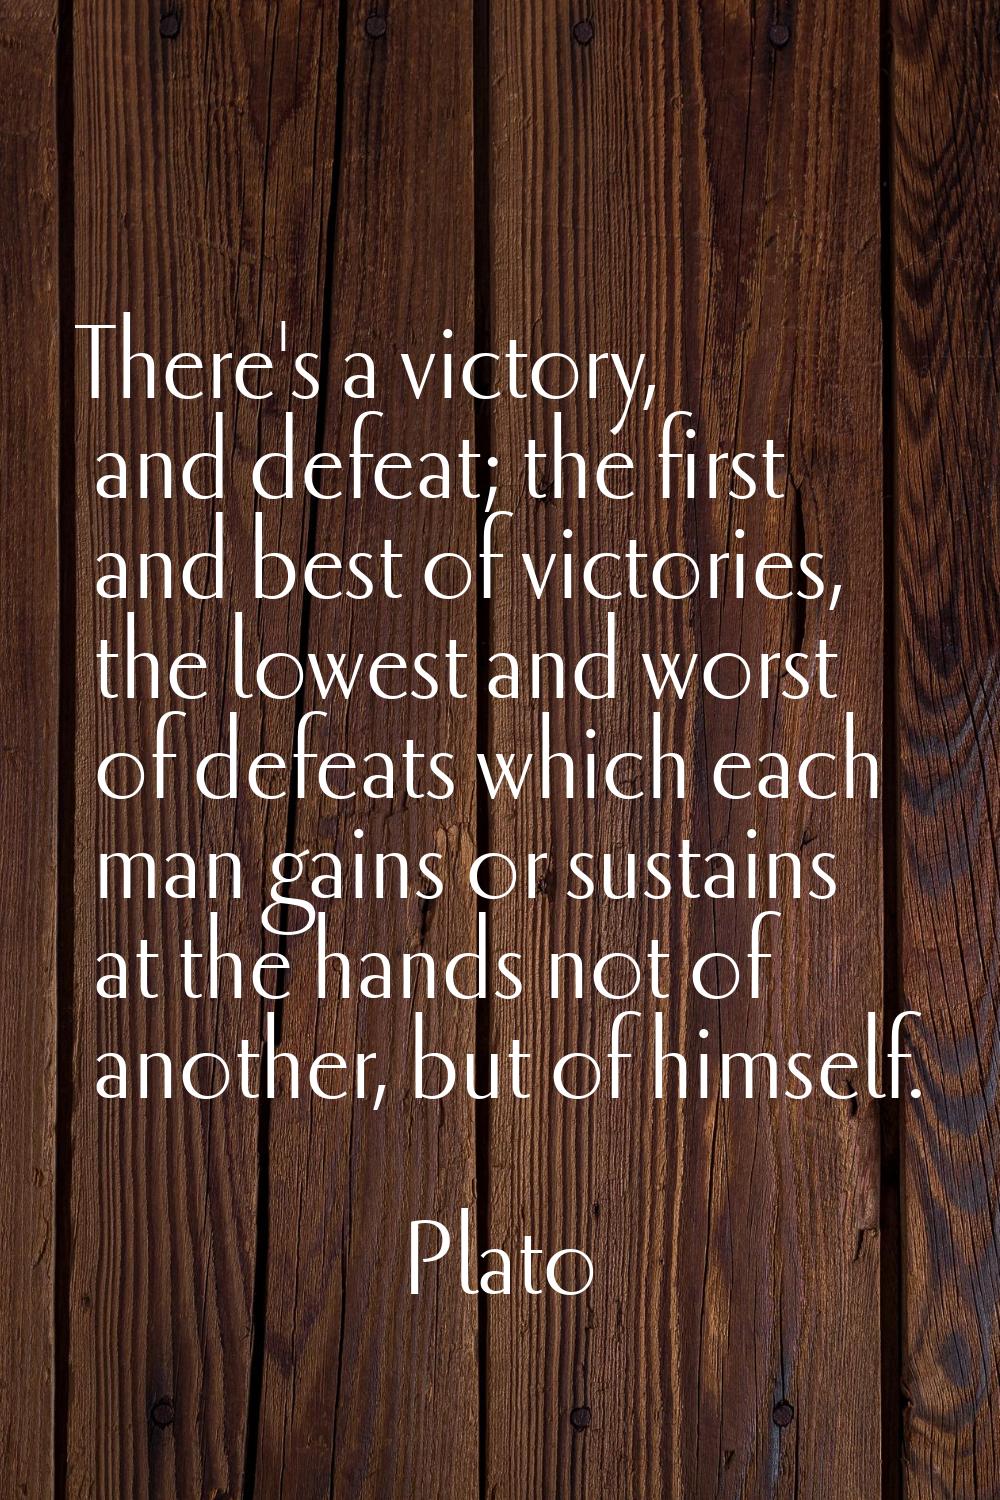 There's a victory, and defeat; the first and best of victories, the lowest and worst of defeats whi